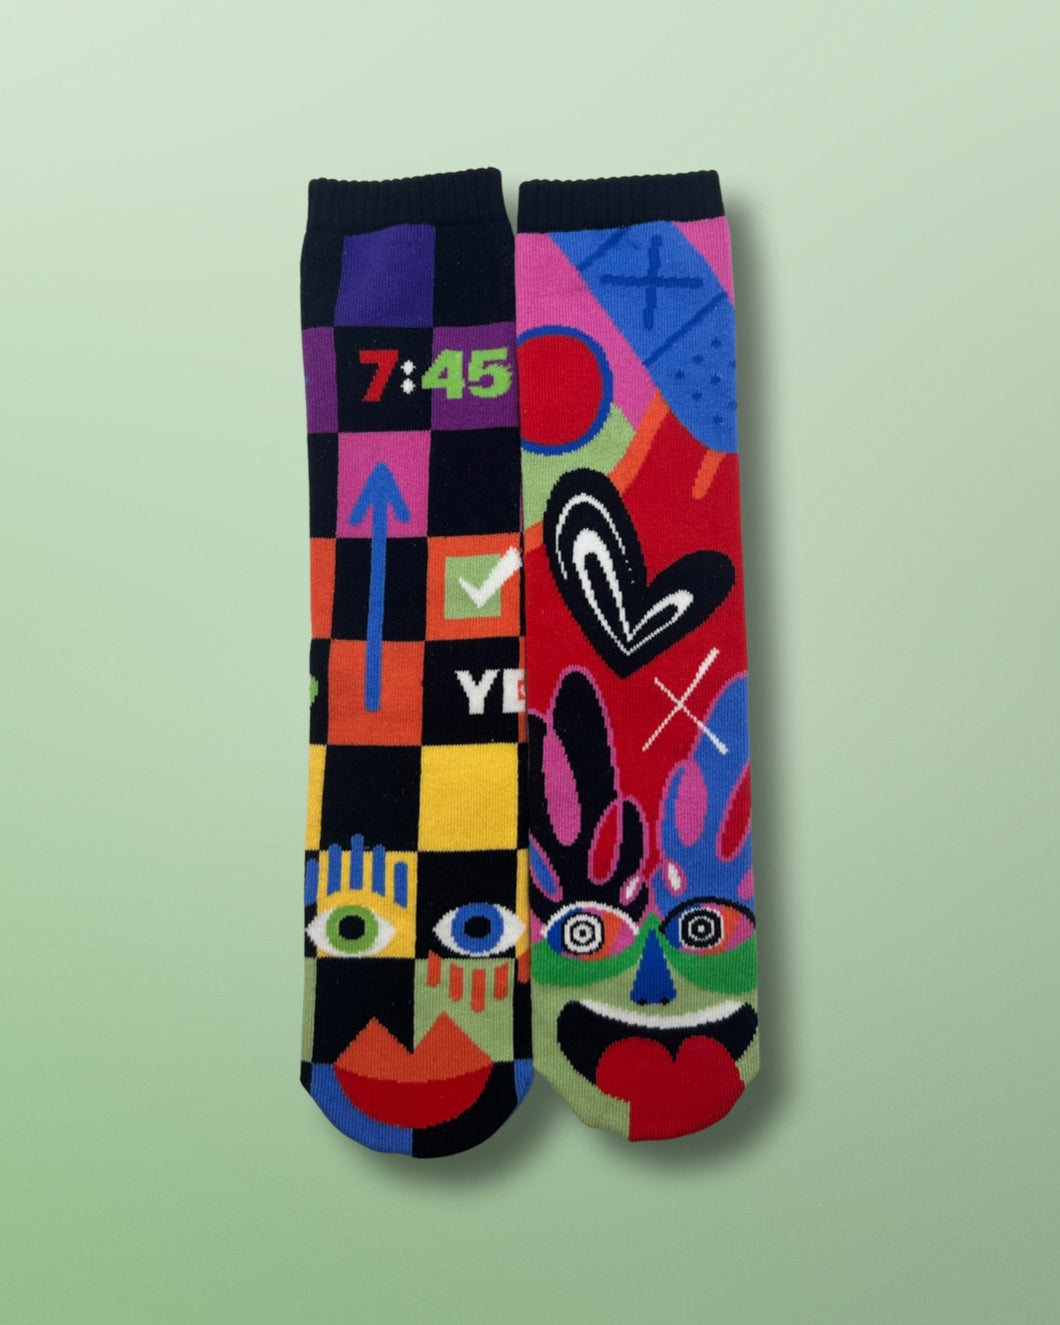 Planner & Spontaneous | Adult Collectible Socks by Jason Naylor